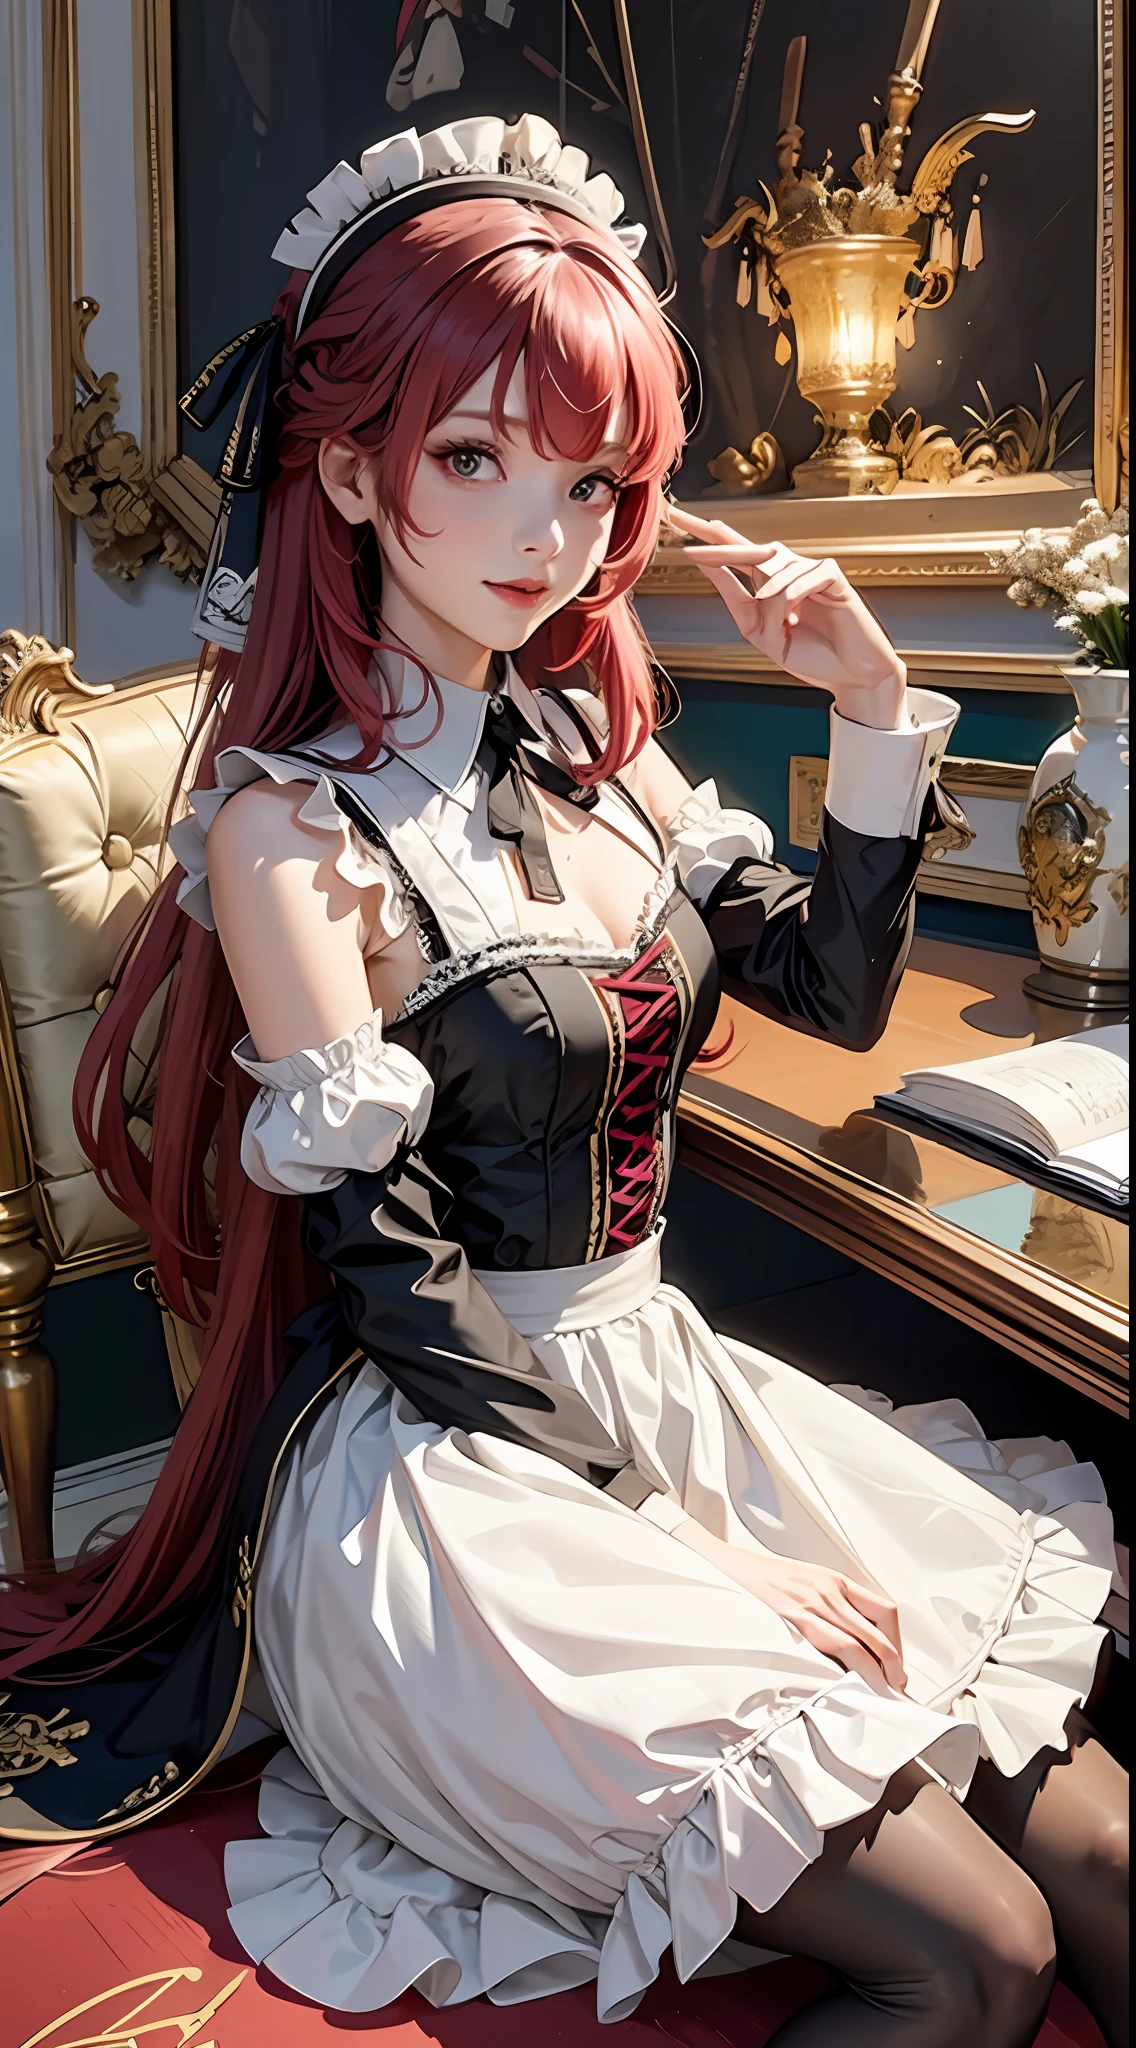 offcial art， Unity 8k Wallpapers， ultra - detailed， Beautiful and beautiful， tmasterpiece， best qualtiy， scientific fiction， （natta：1.2）， （1girll：1.3）， （young：1.1），The picture is clear，a close up of a woman in a dress and stockings, gorgeous maid, Maid outfit， Fighting posture， is shy， ssmile， Be red in the face， long whitr hair， whaite hair， Striped hair， red eyes， Hair bow， Moles under the eyes， （cinmatic lighting：1.2），One poses for a photo in a maid costume，the maid outfit，A dress dressed in lace，Luxurious theme，realistic dress，Skin details are highly detailed，Watch machinery，Beautiful maid，feminine beauty，Stunning character art，Ray traching